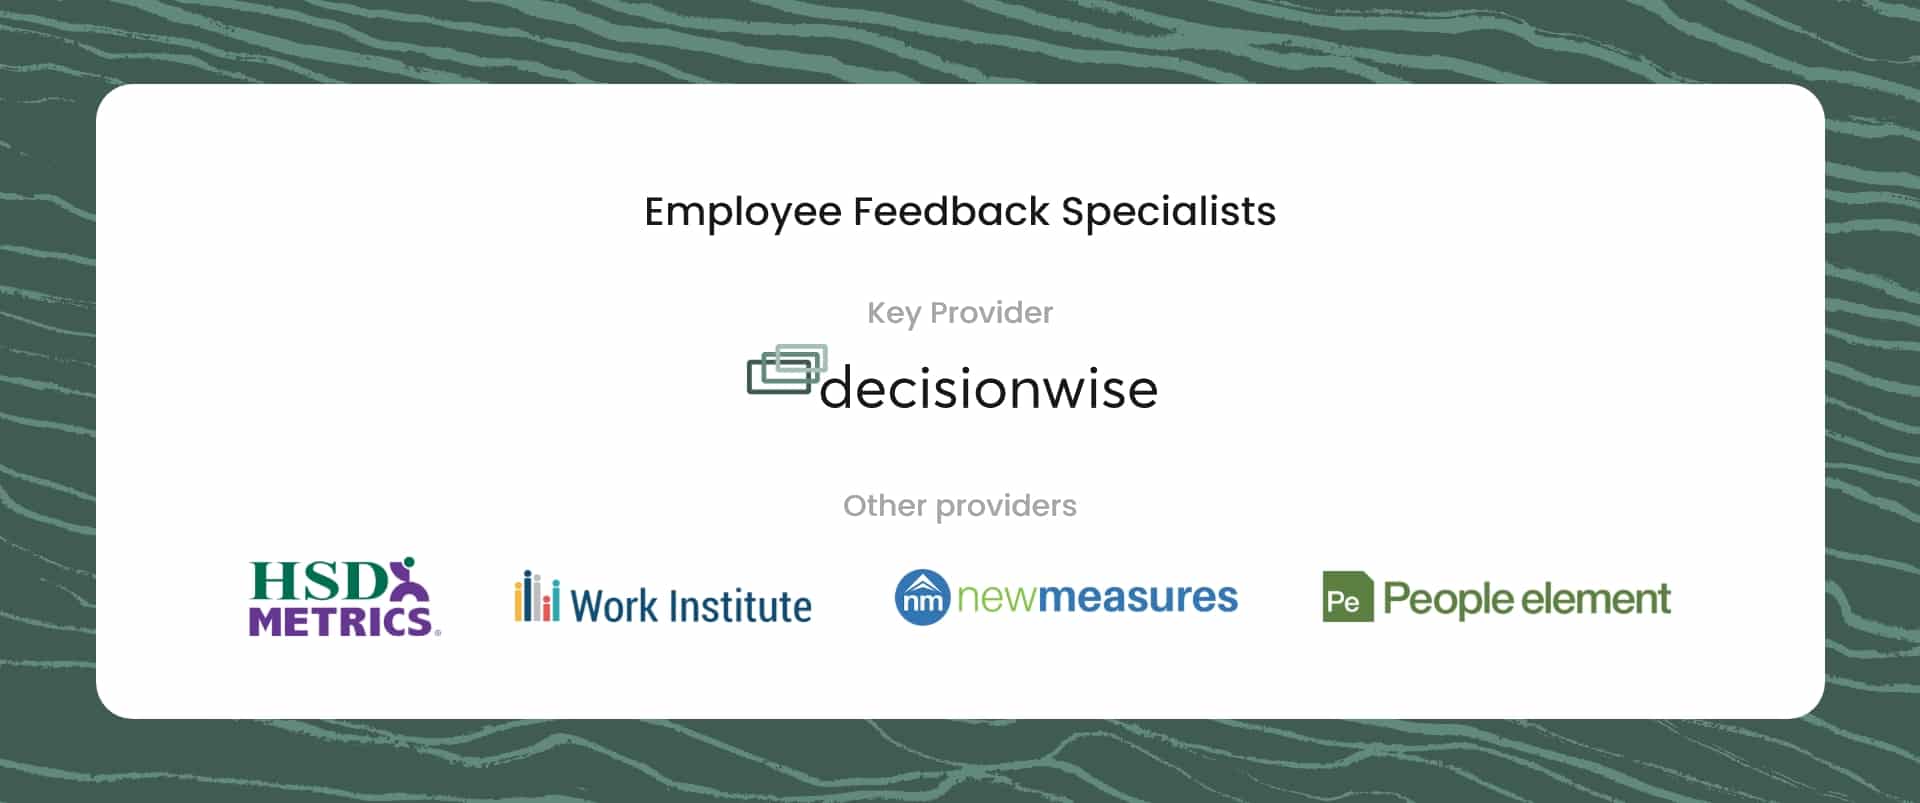 Employee Feedback Specialists vendor type; employee experience tools and providers